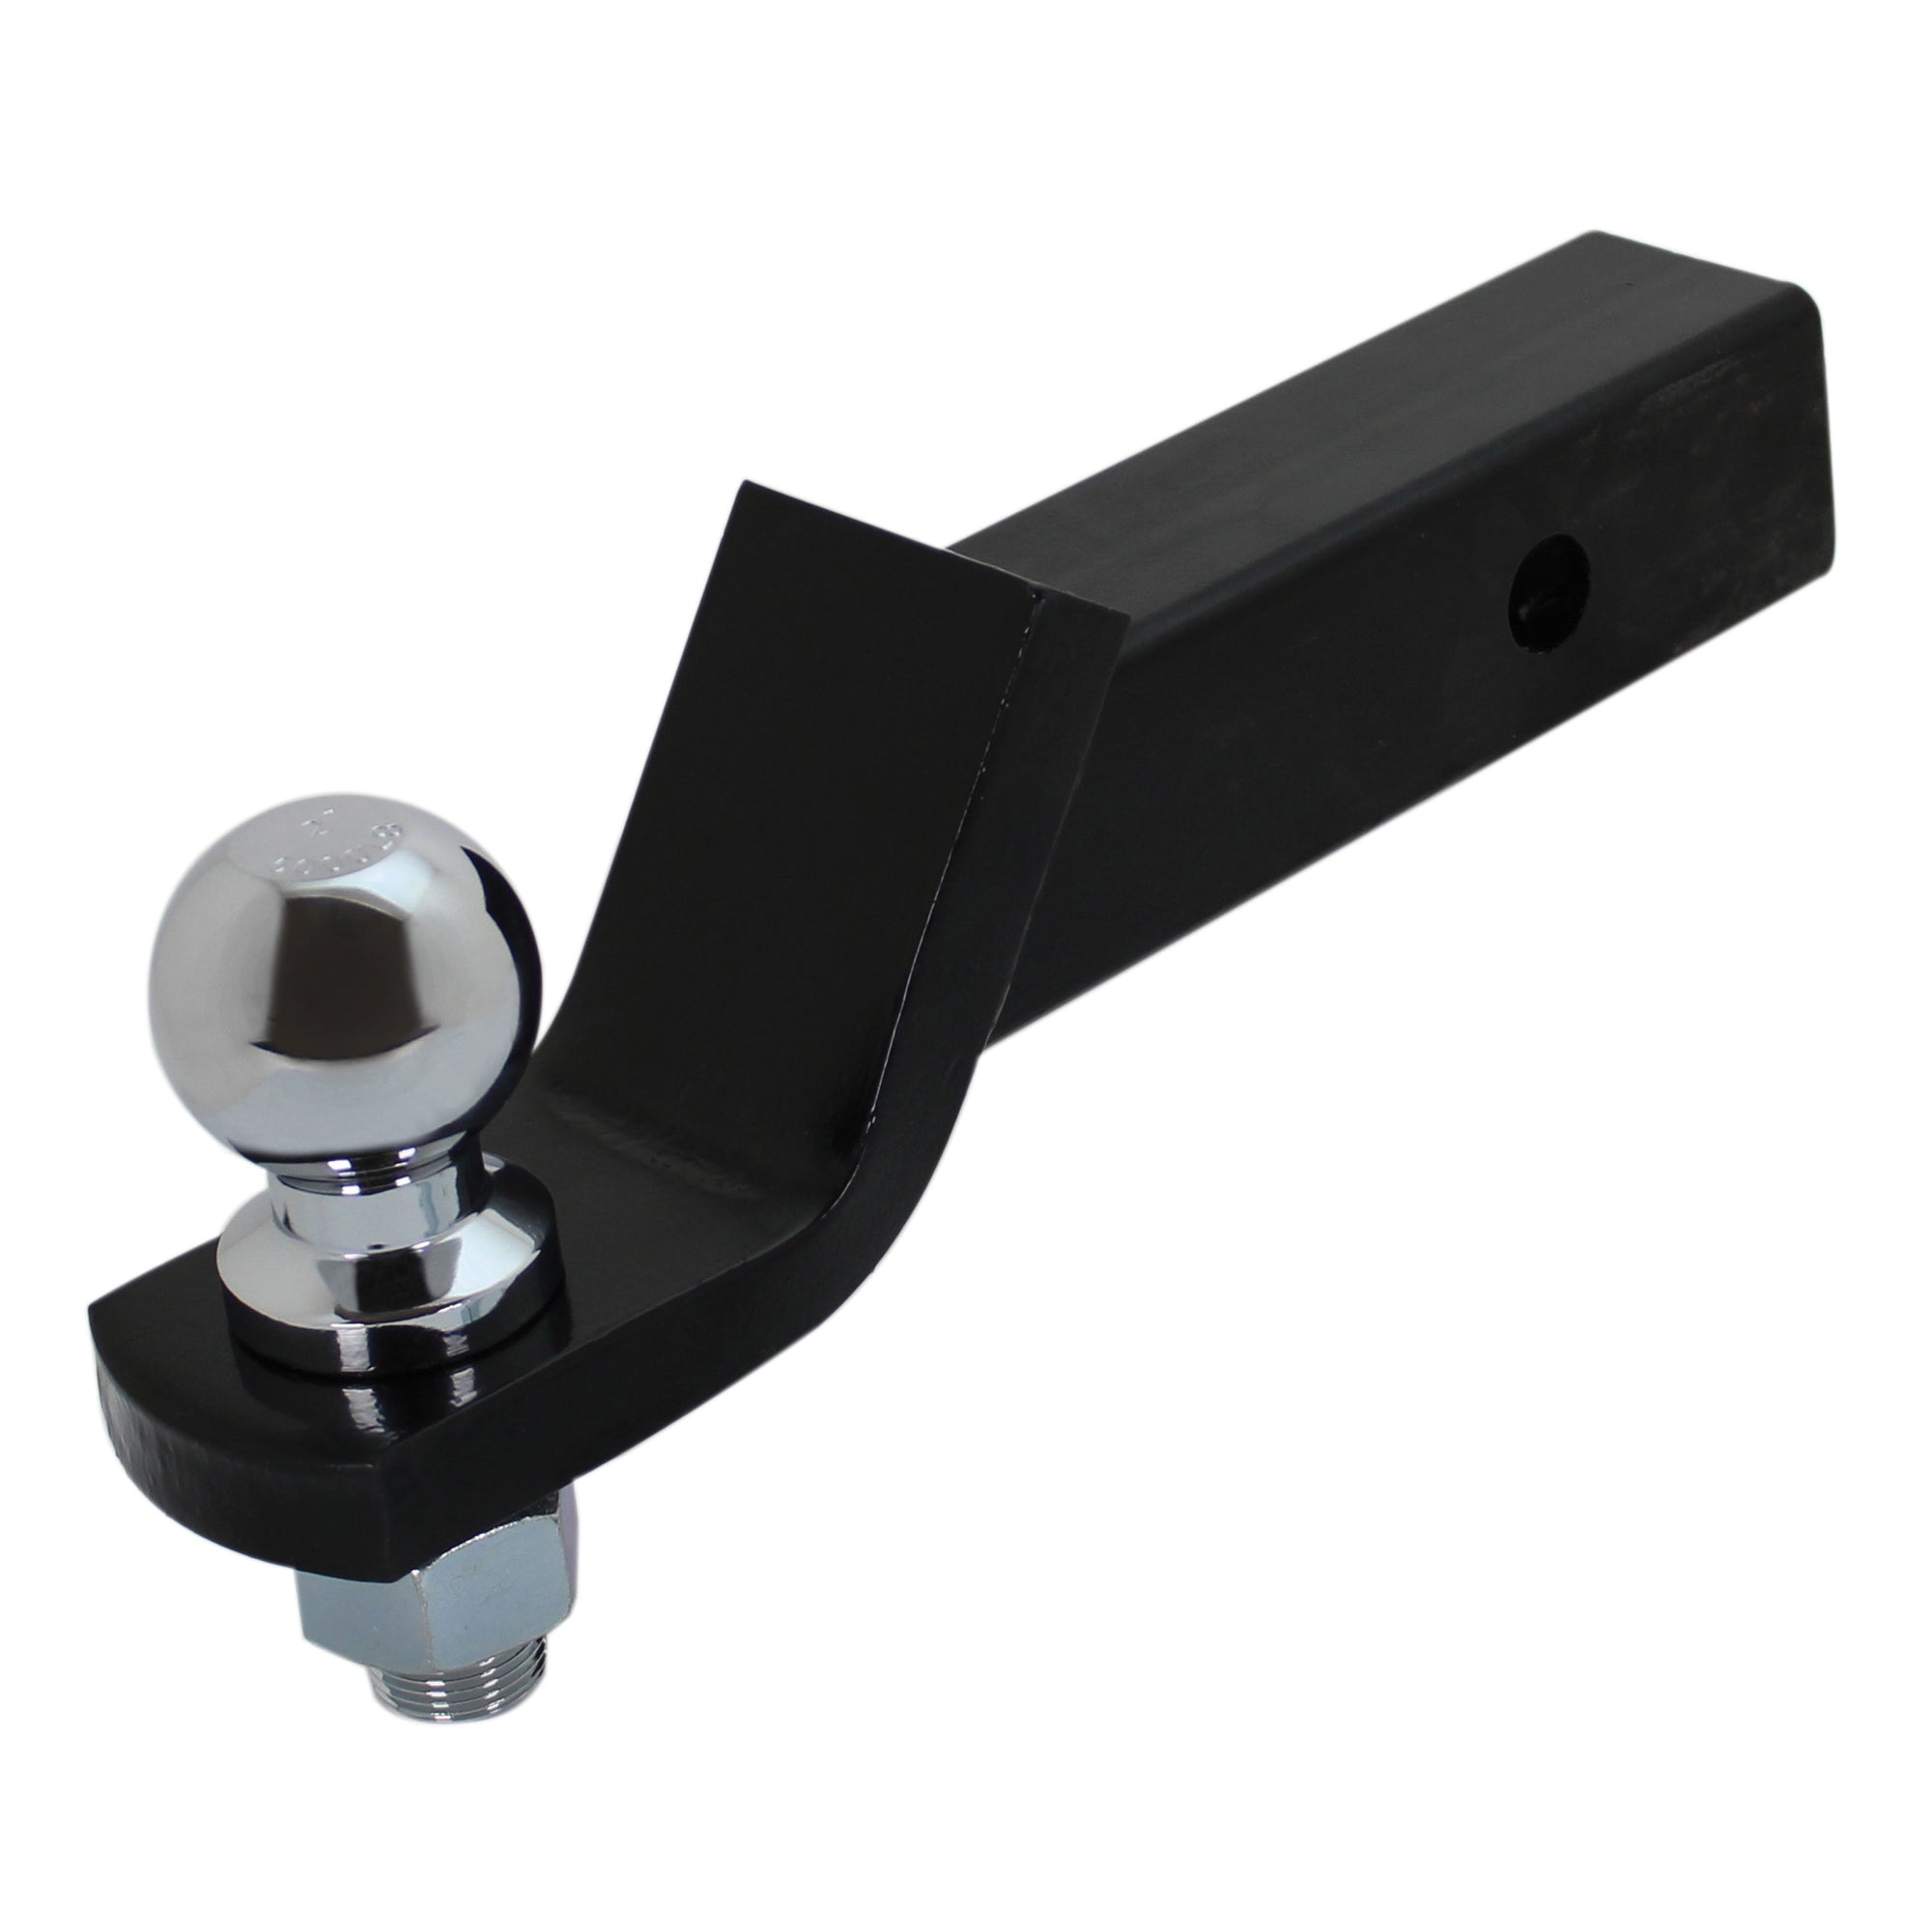 2" BALL MOUNT WITH BALL